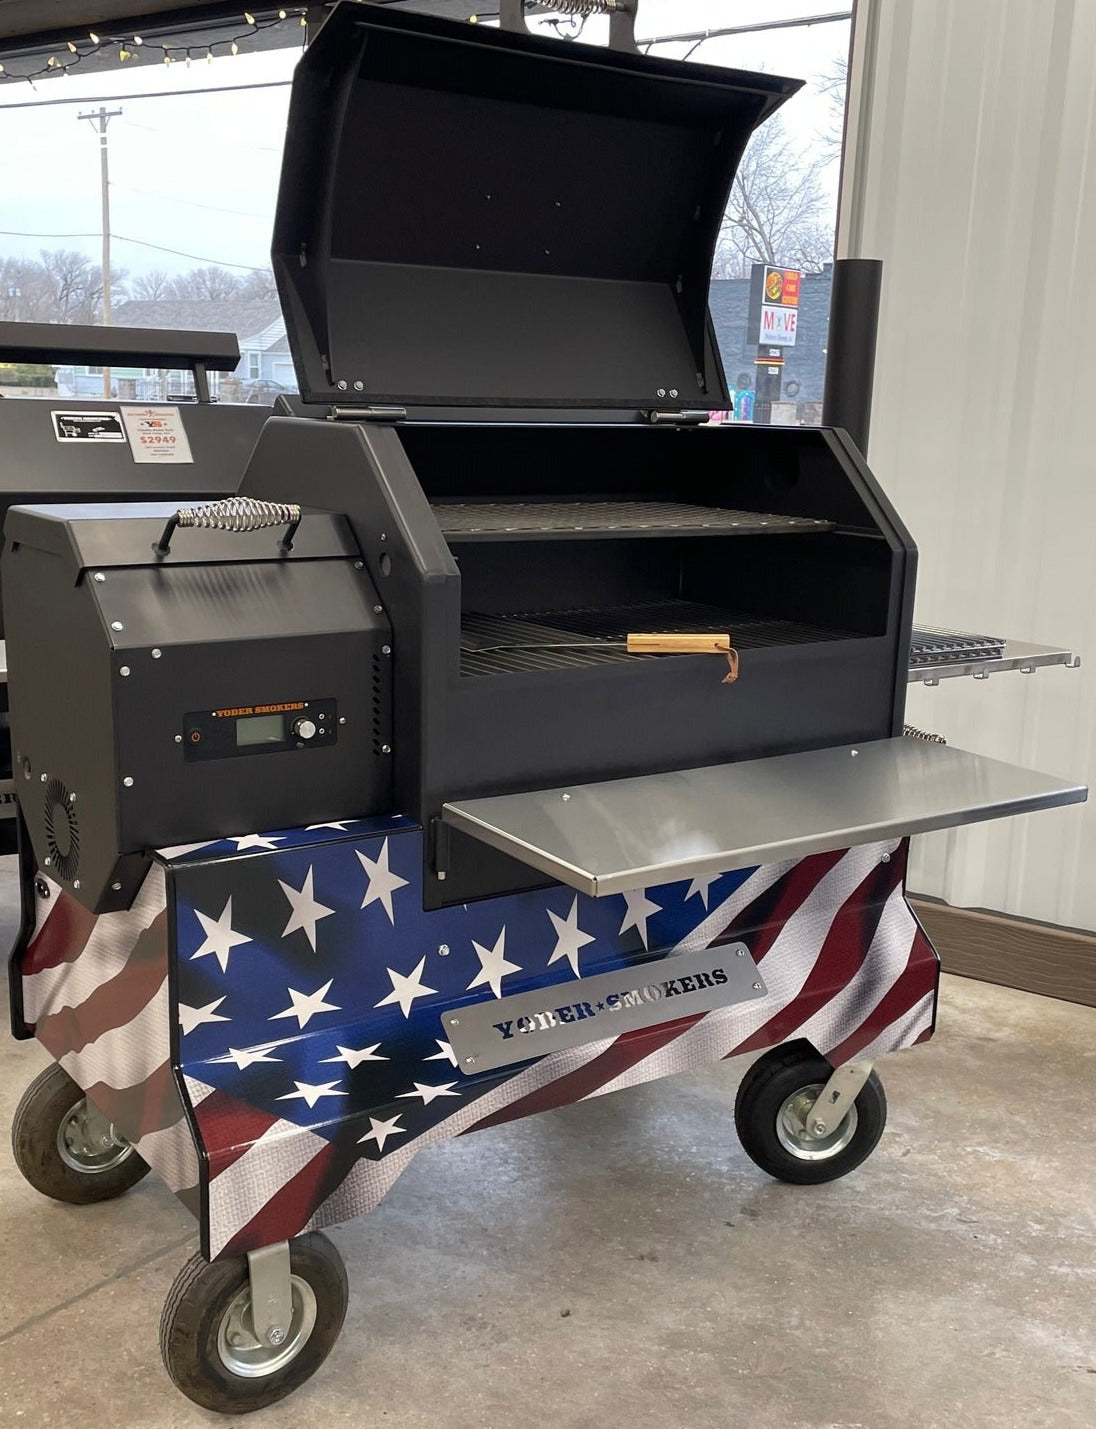 Local Special, Scratch & Dent, Yoder Smokers YS640s Pellet Grill on Black Competition Cart with American Flag Wrap Outdoor Grills